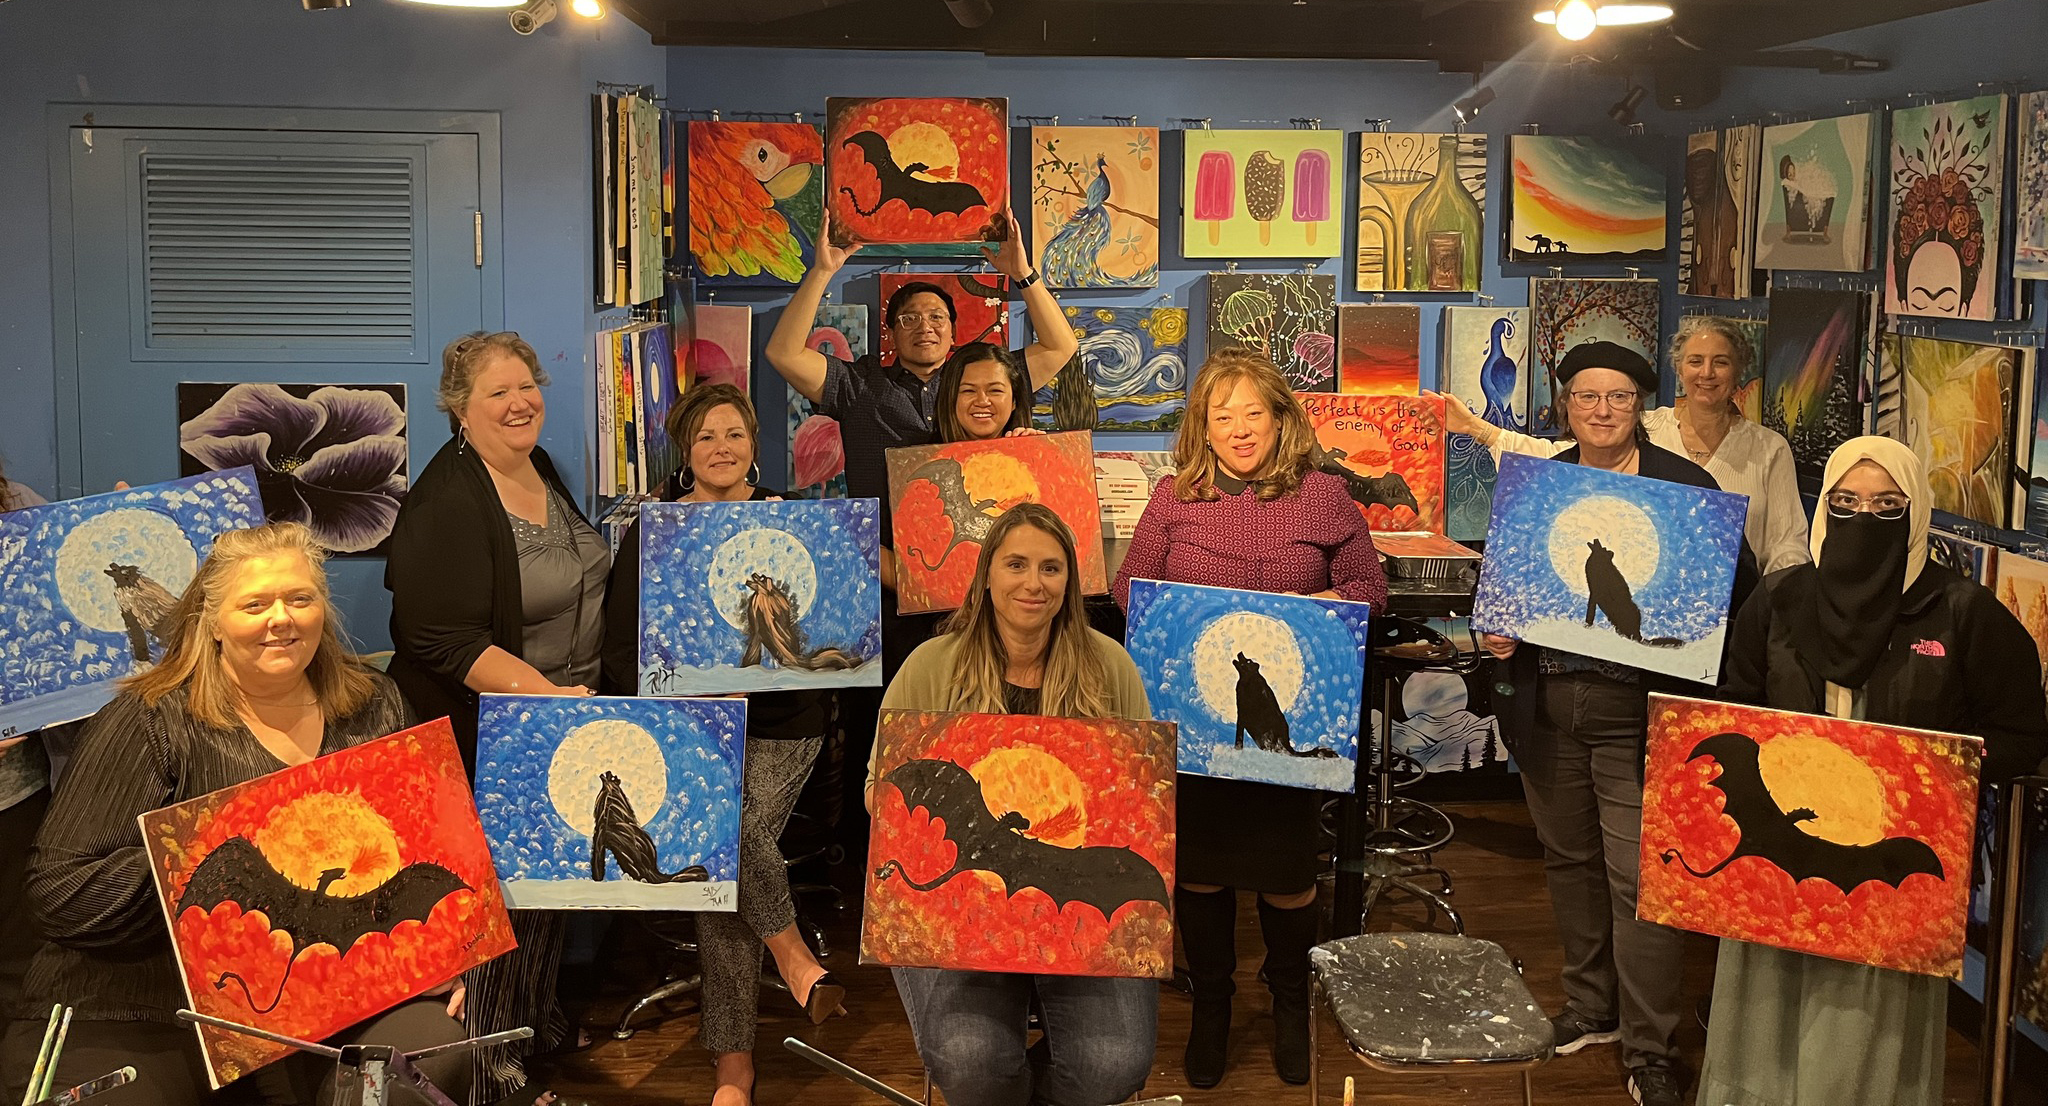 How Corporate Painting and Wine Parties Can Boost Team Morale